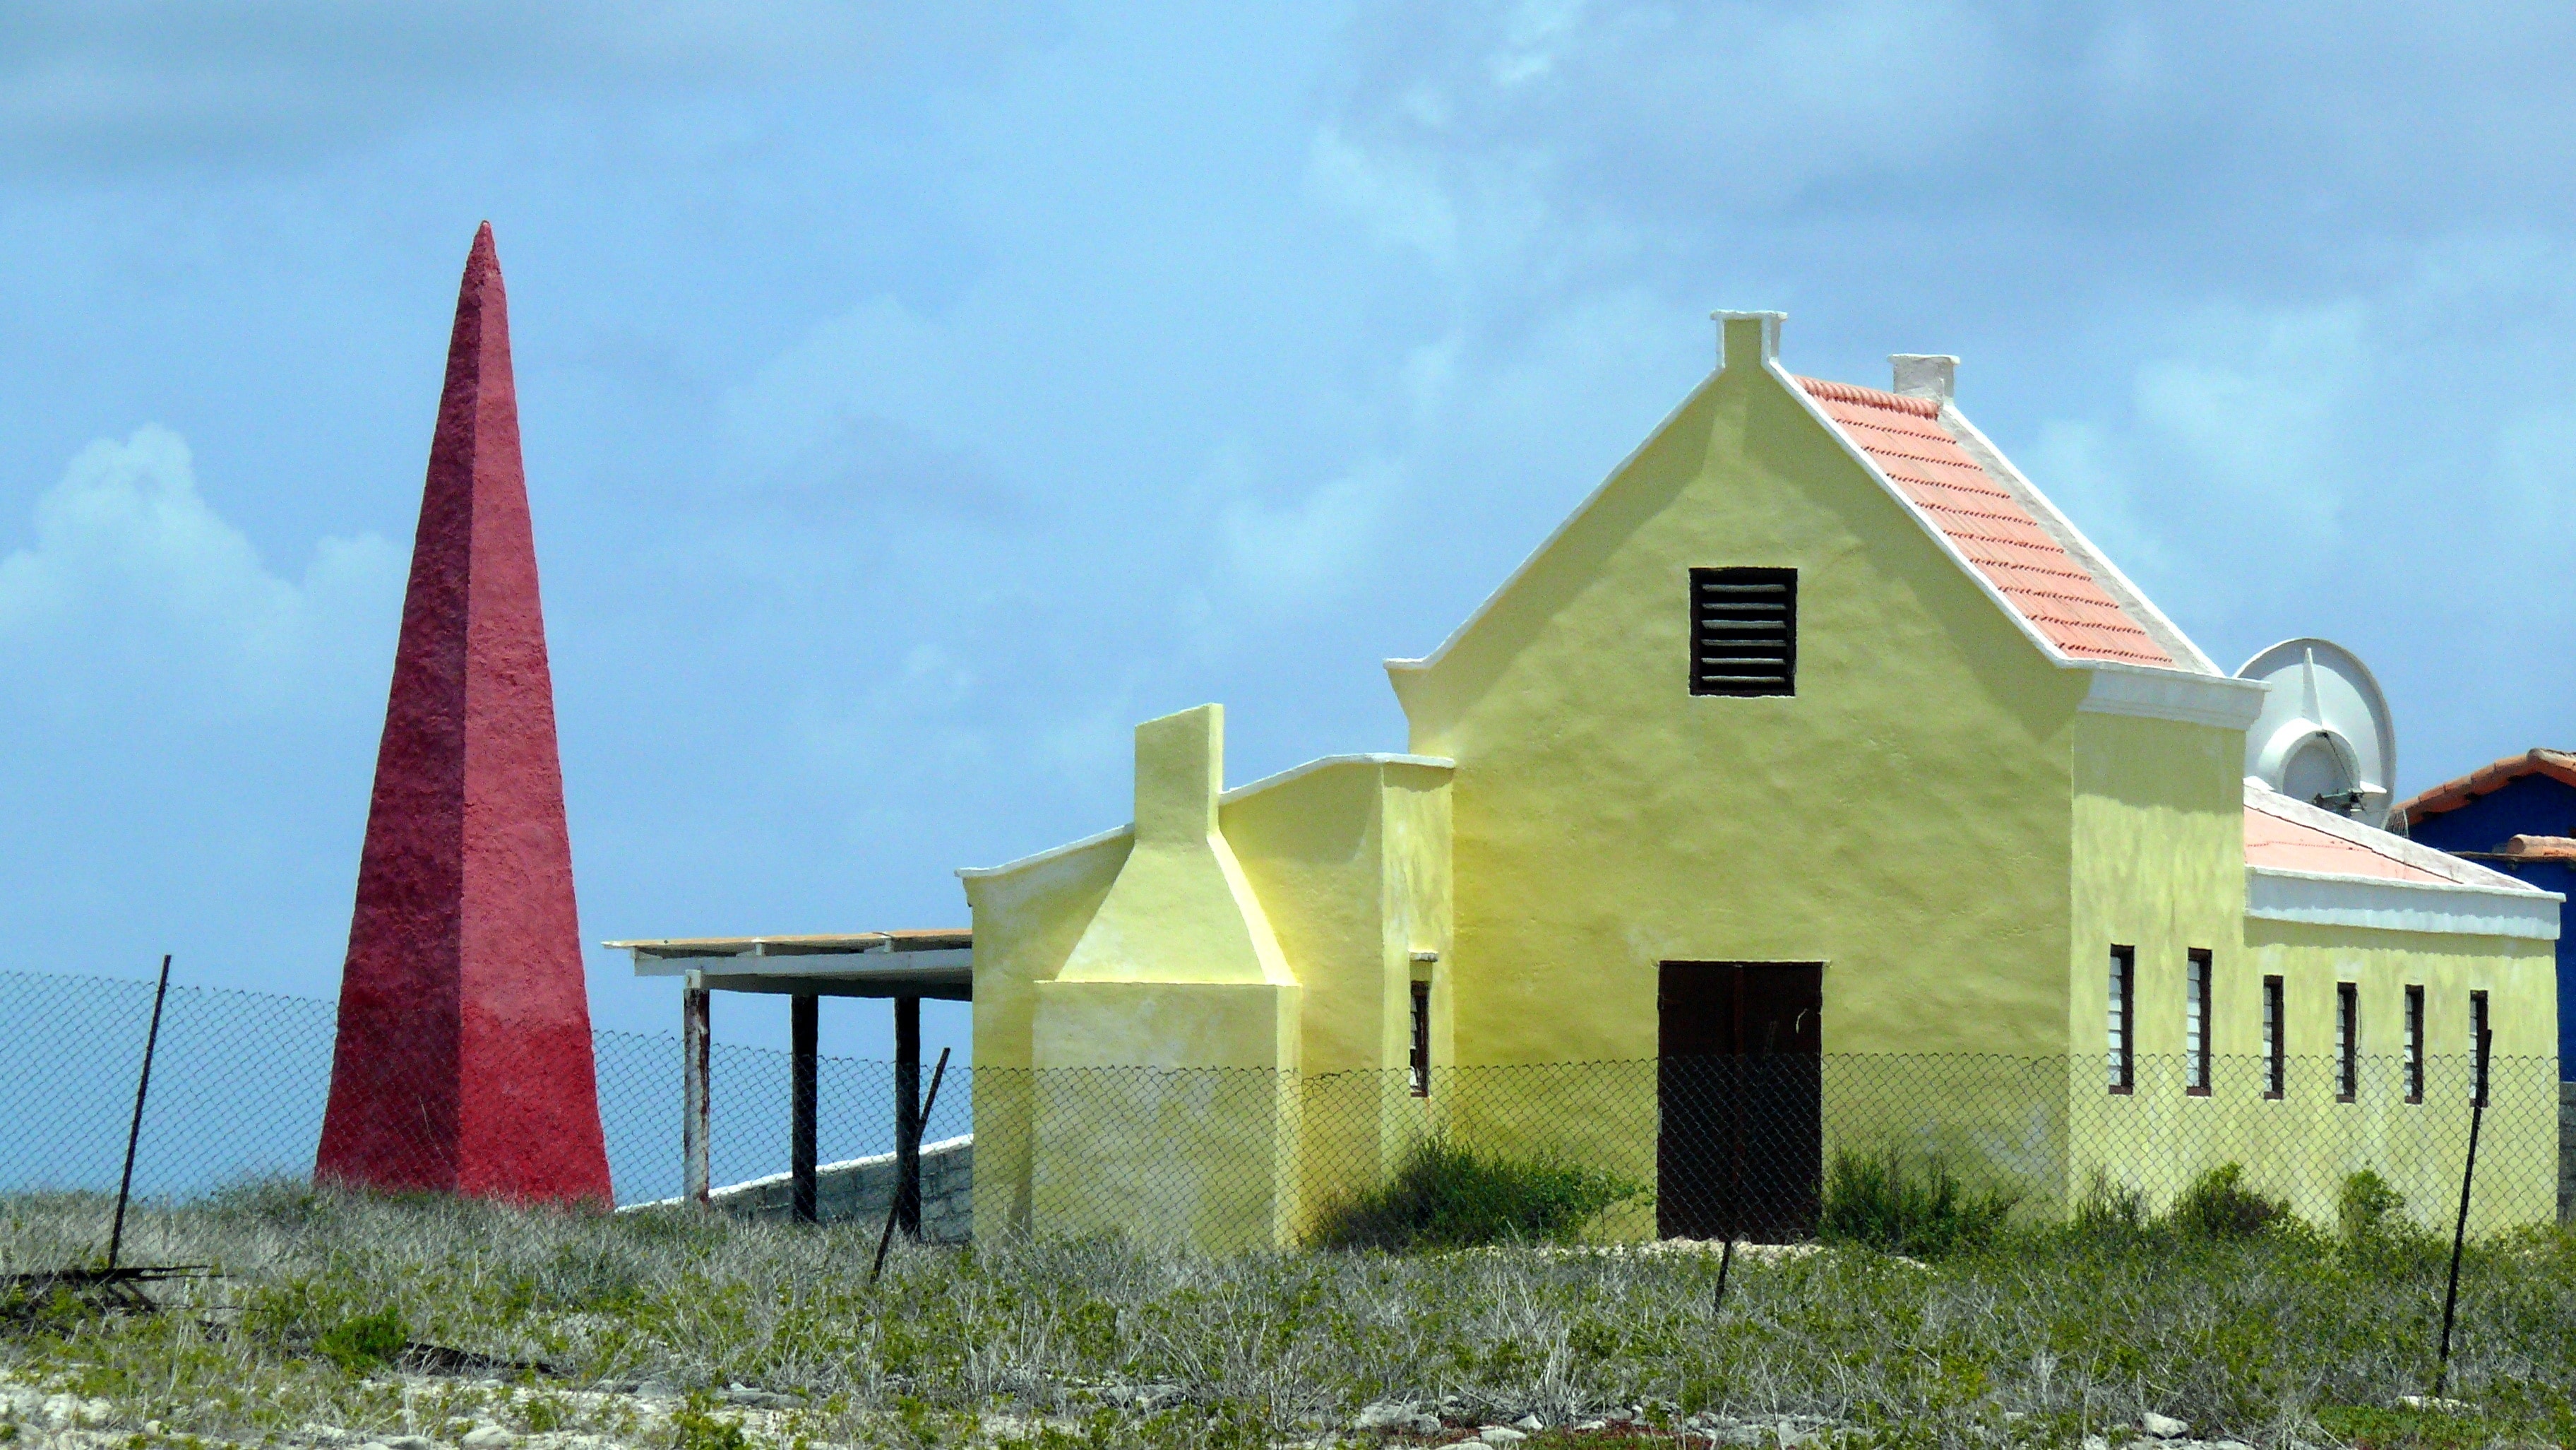 yellow concrete house beside red tower